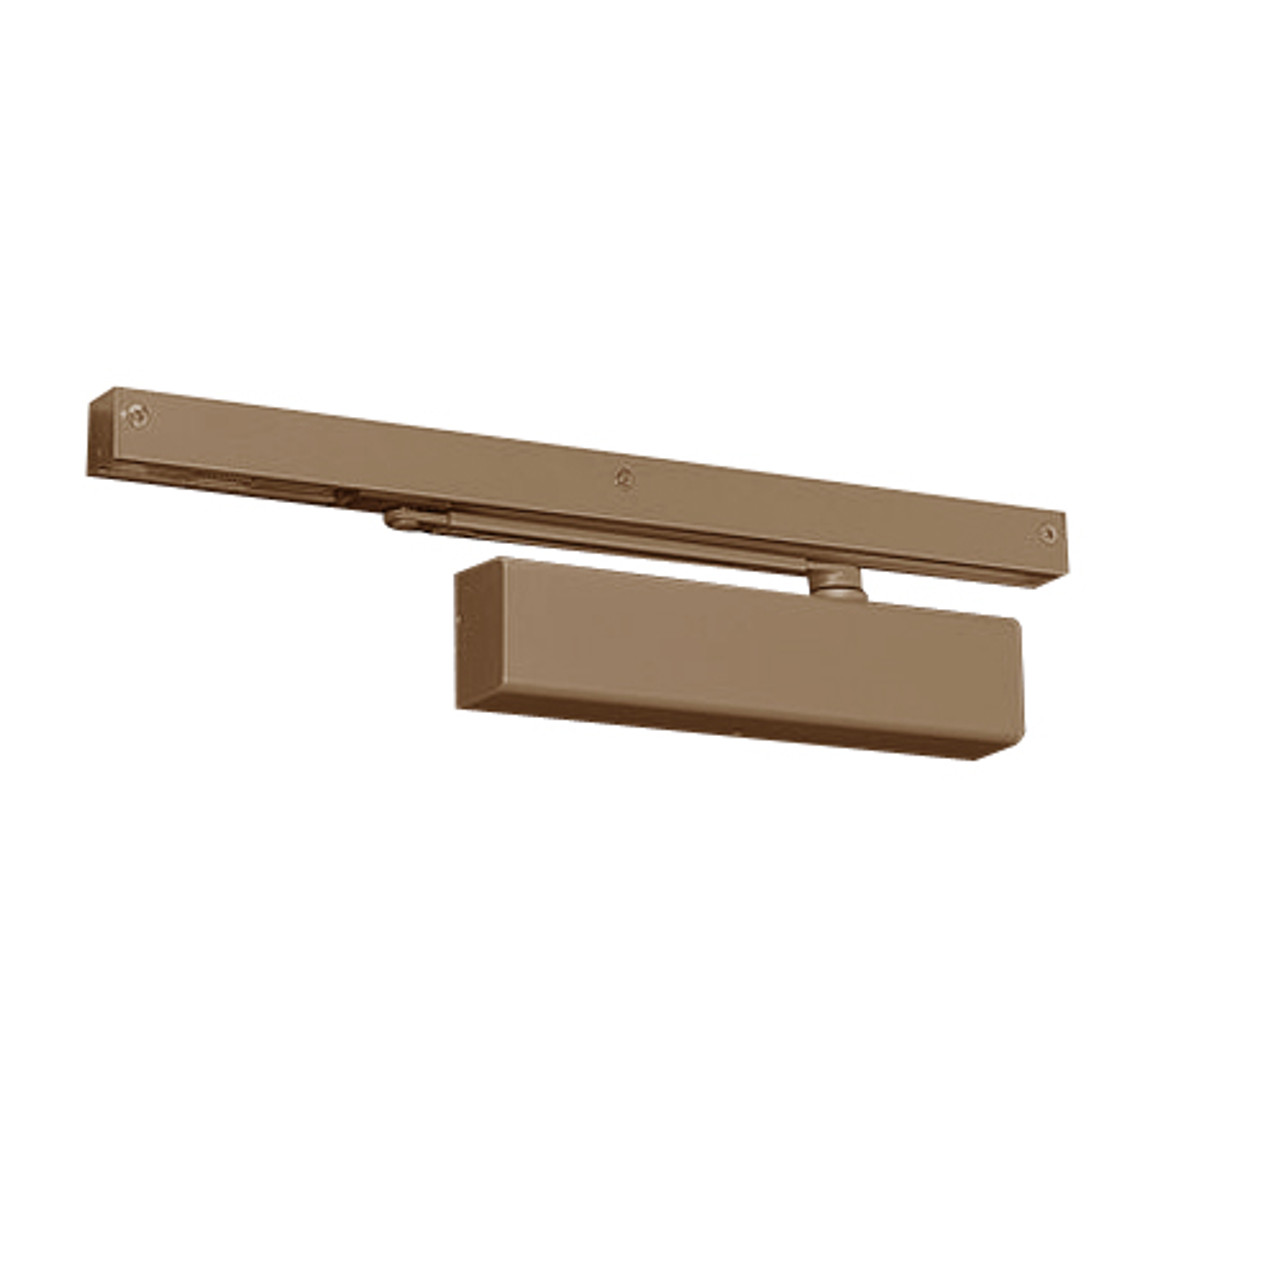 7500STH-M-691 Norton 7500 Series Hold Open Institutional Door Closer with Pull Side Slide Track in Dull Bronze Finish